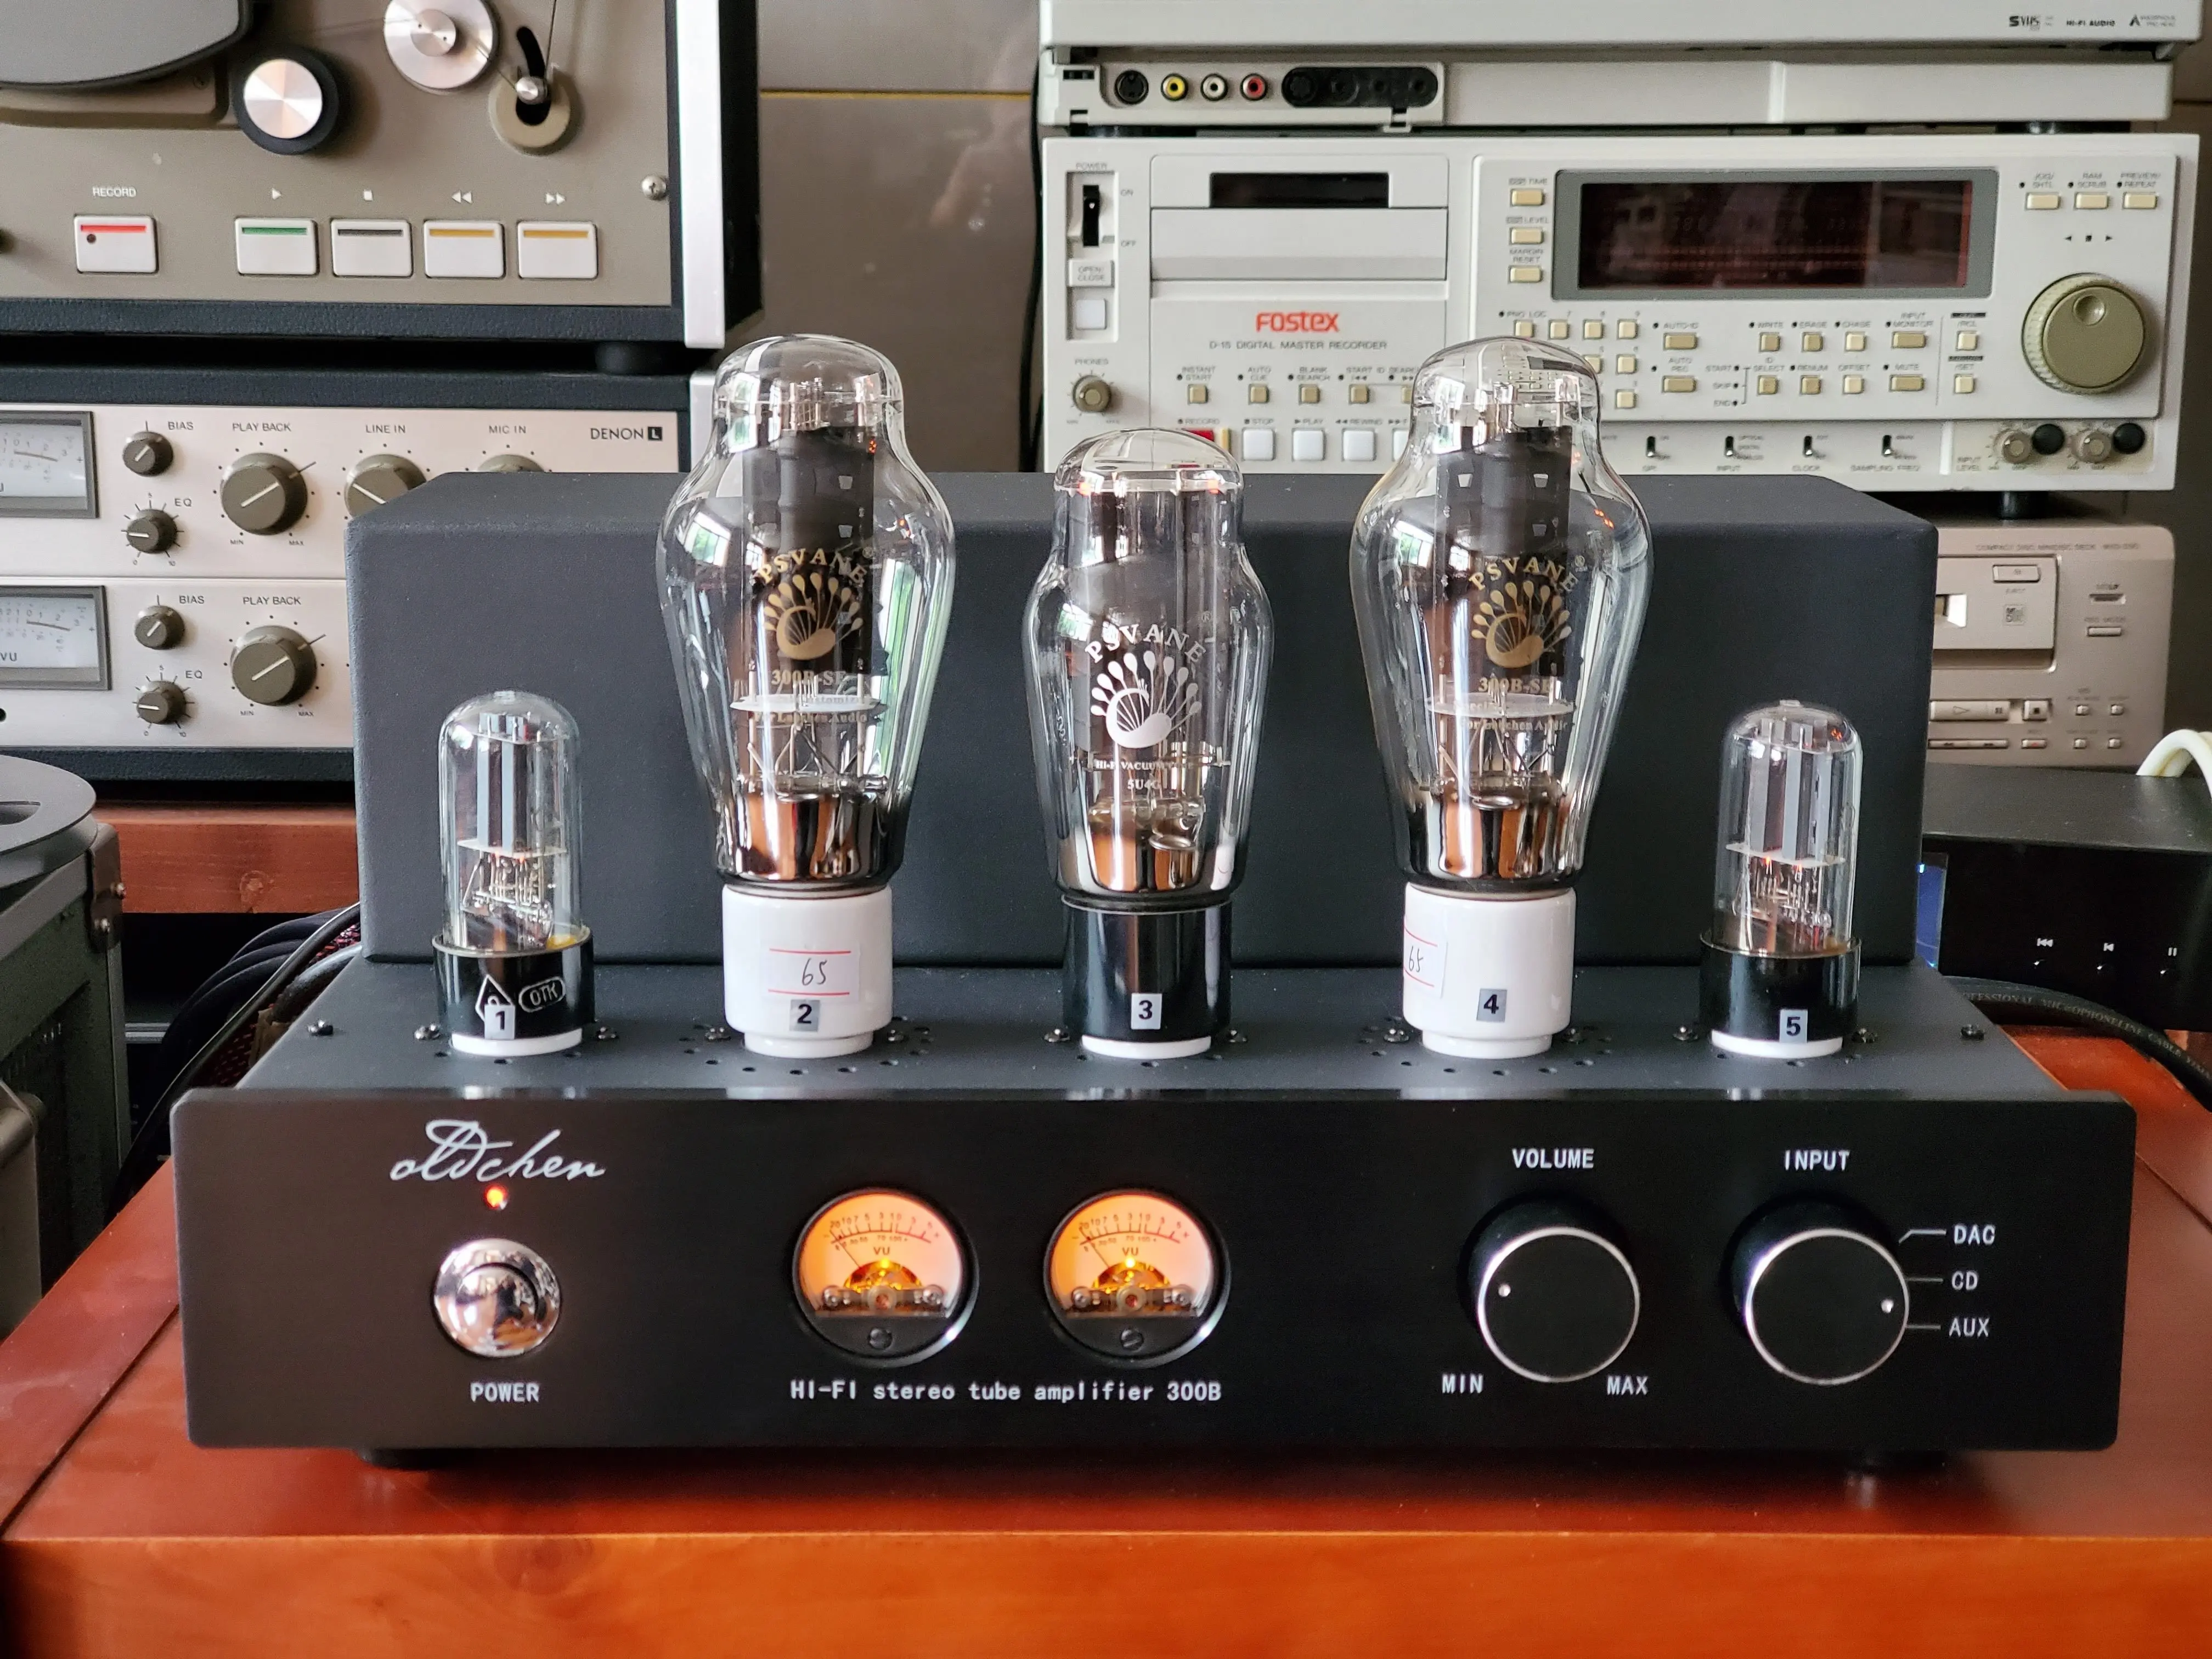 300B Tube Amplifier Single-ended Home Theater Pure Class A HIFI Tube Sound Amplifier with 274B and CVS181-SE